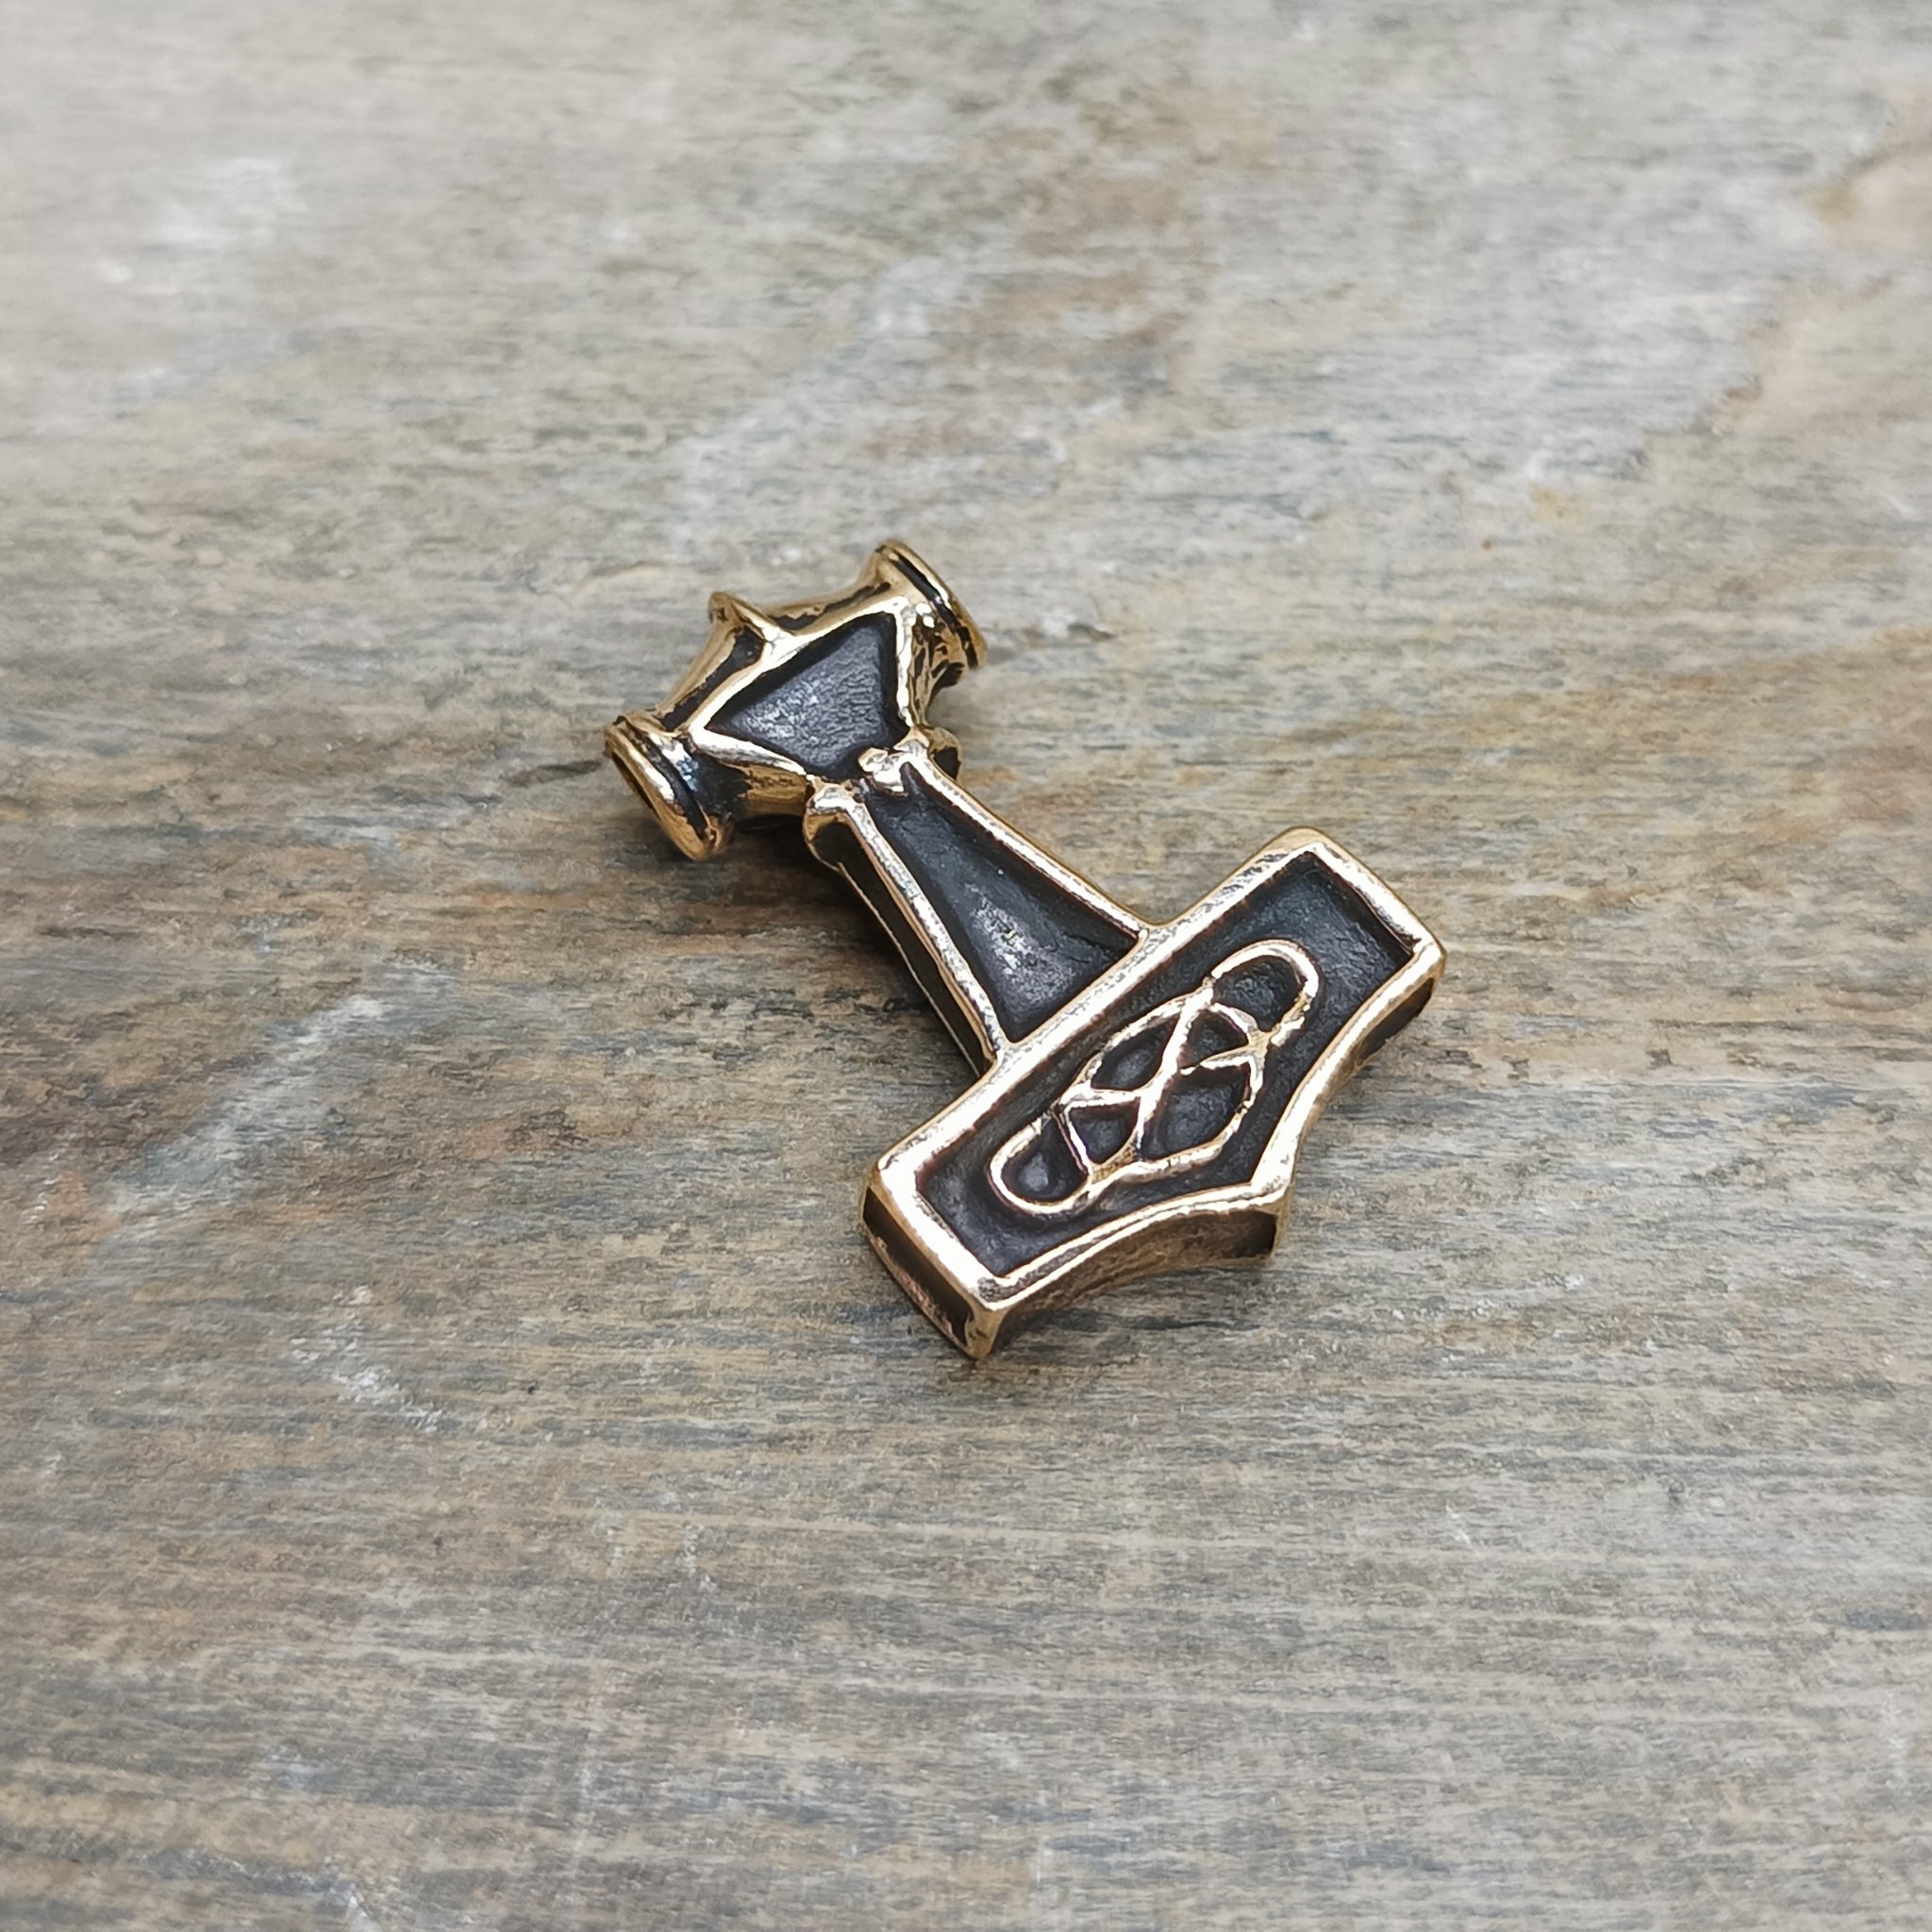 Small Bronze Thunder Thors Hammer Pendant on Rock - Back Angle View